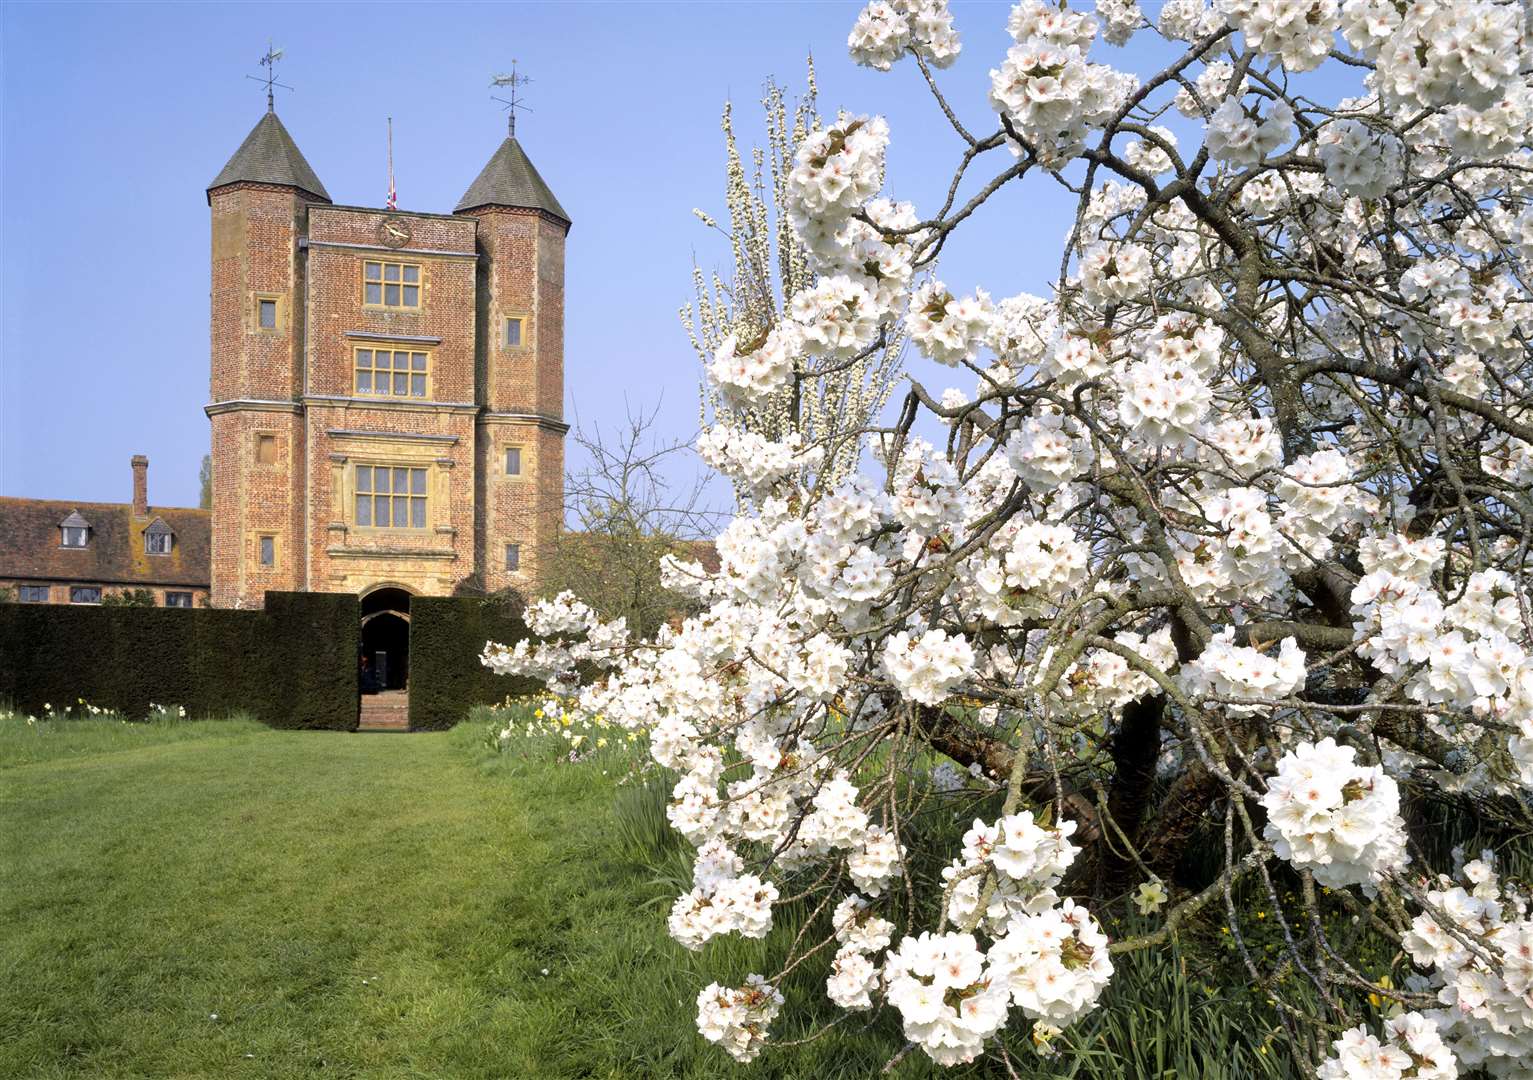 Apple blossom in the orchard at Sissinghurst Castle in March. Picture: National Trust / David Sellman